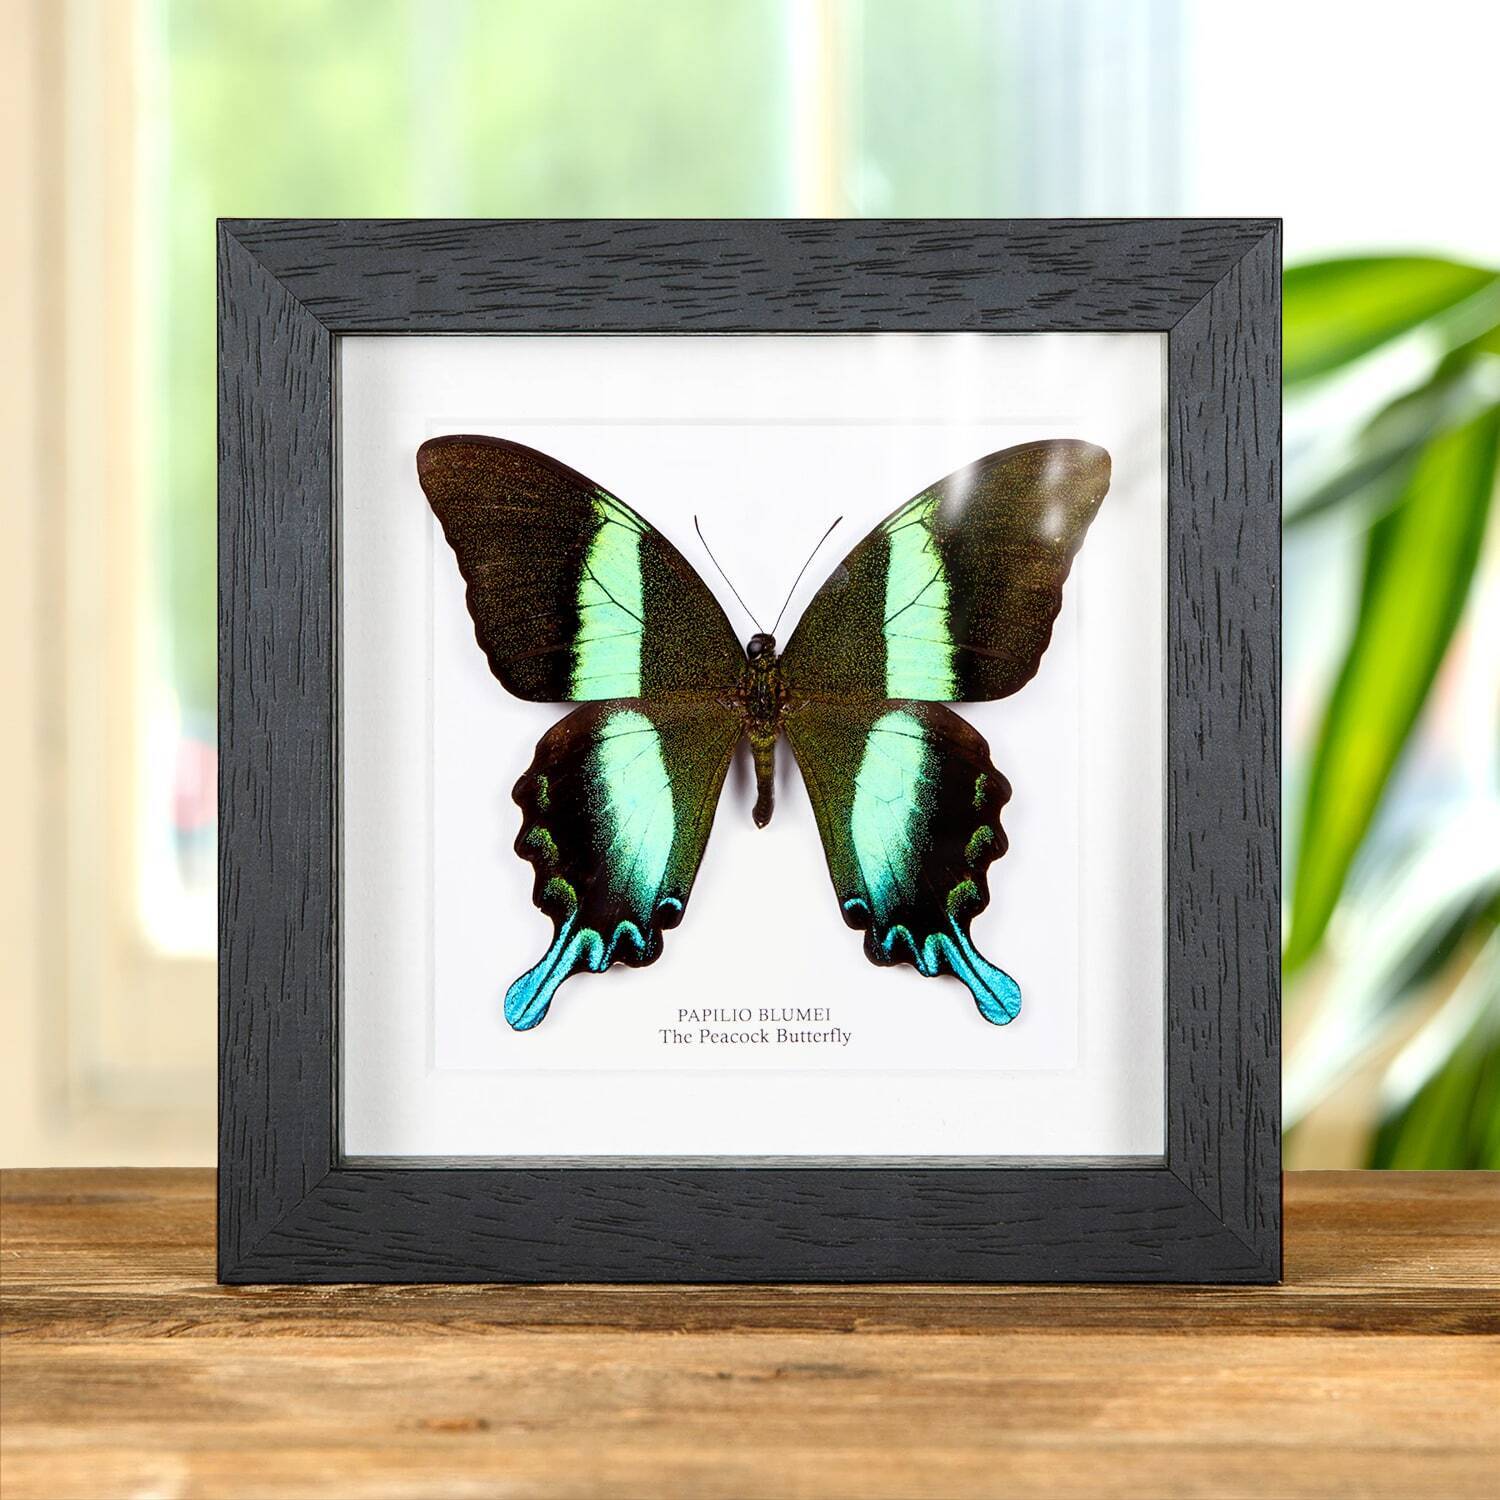 The Peacock Taxidermy Butterfly Frame (Papilio blumei)